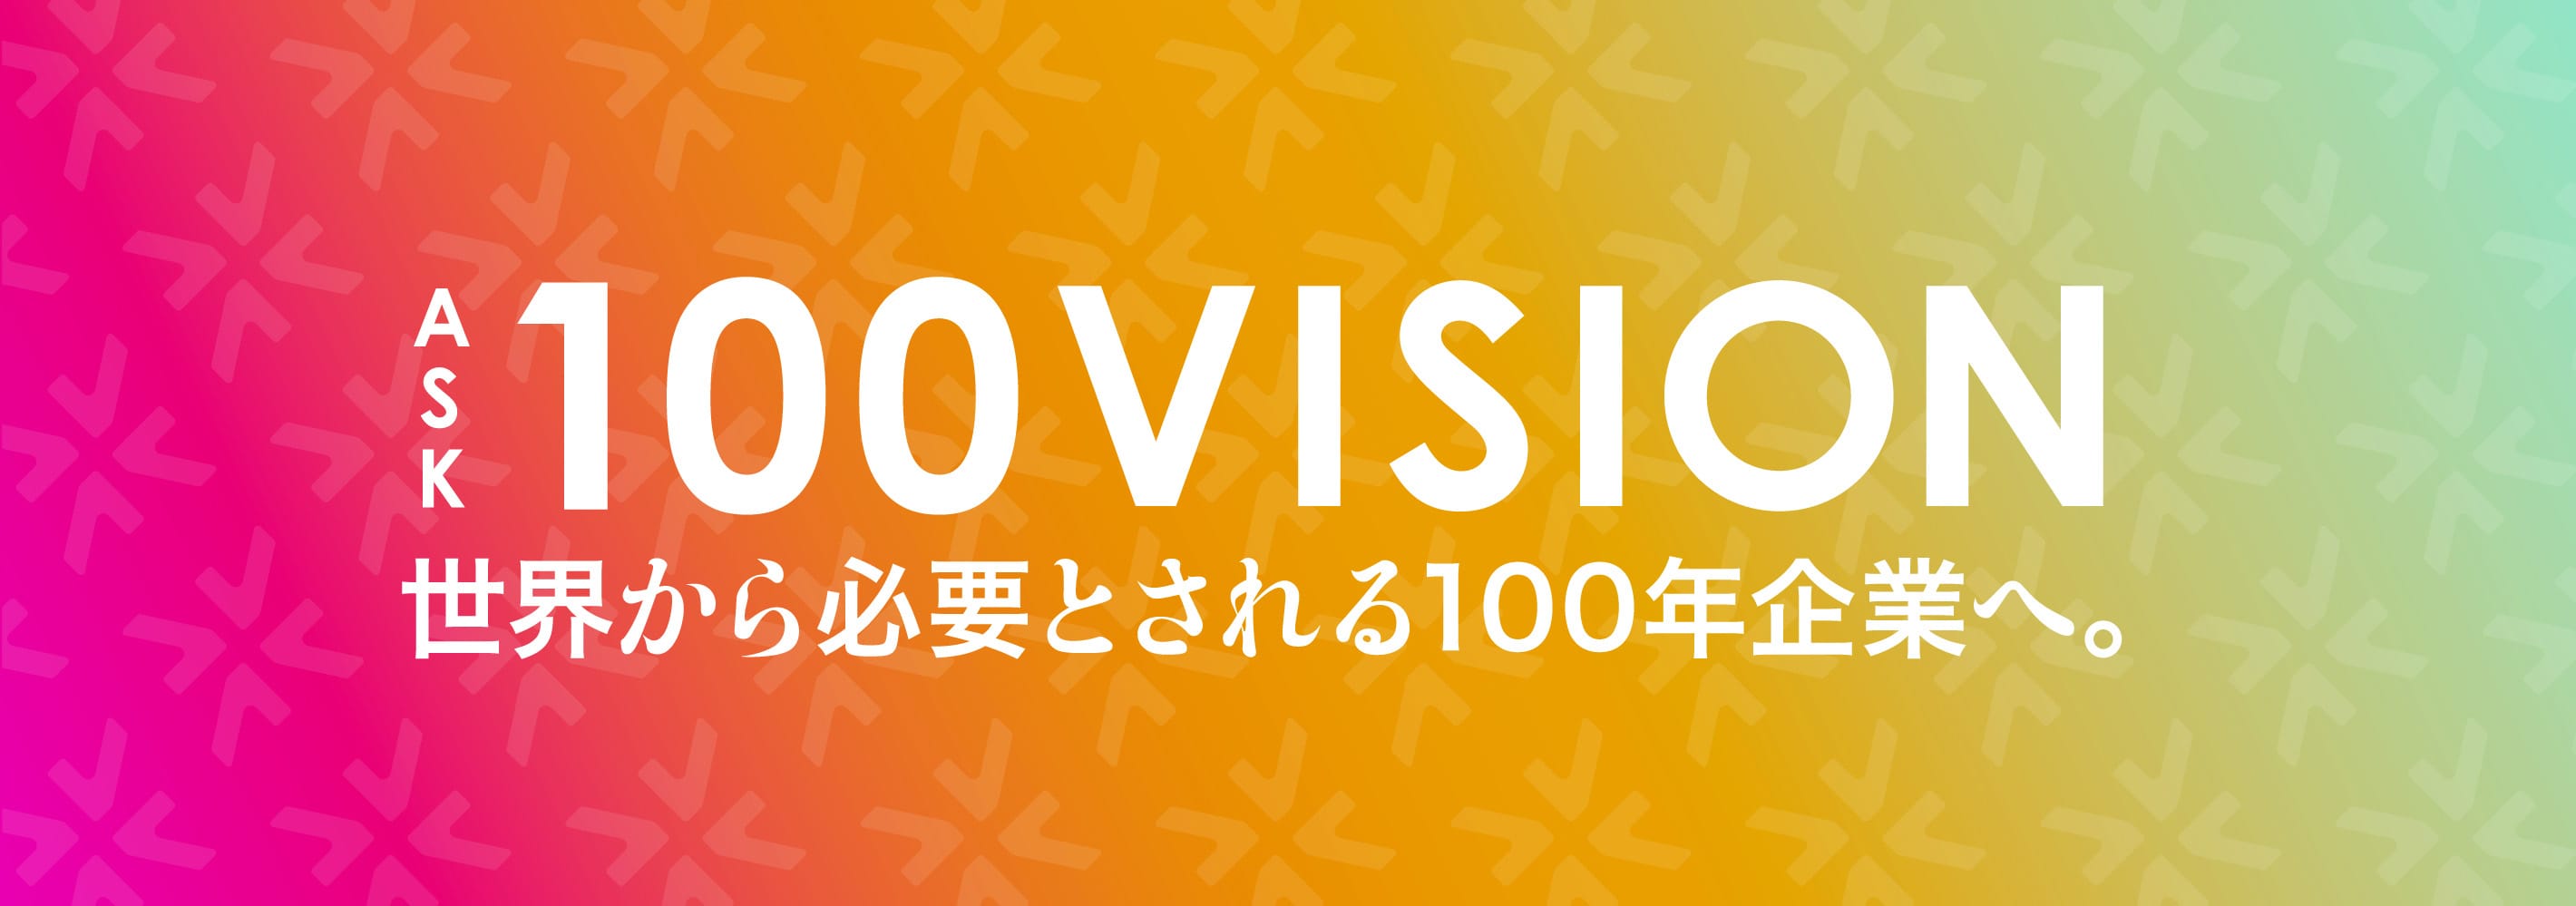 ASK 100VISION